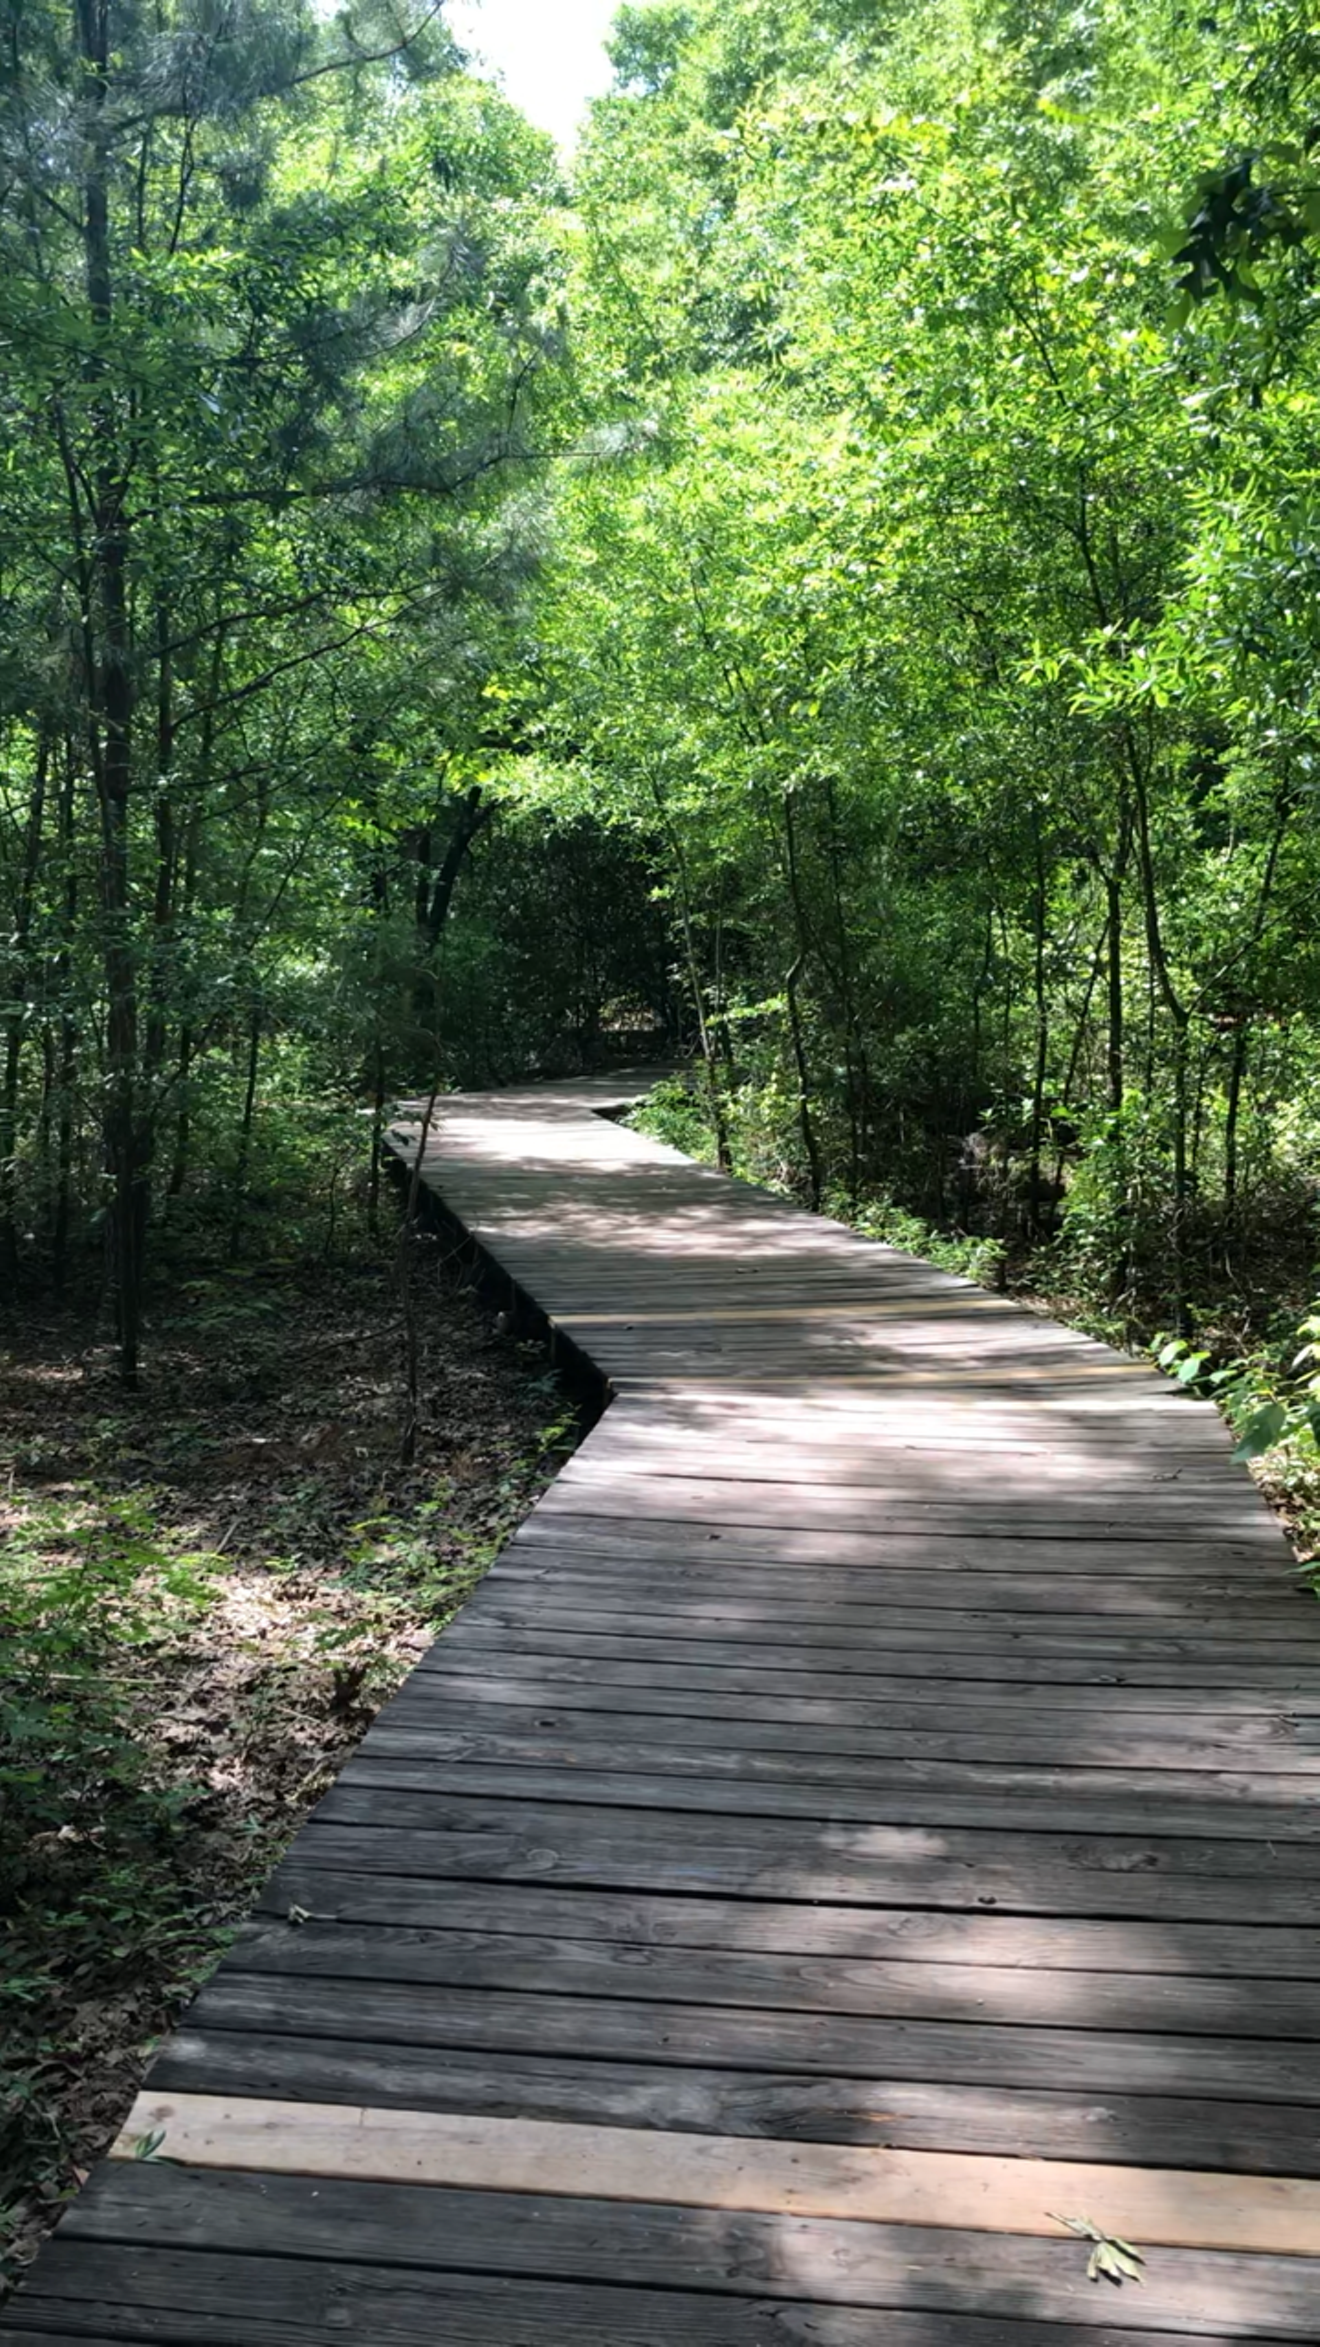 This Houston Arboretum is the magic of nature in the heart of the city.